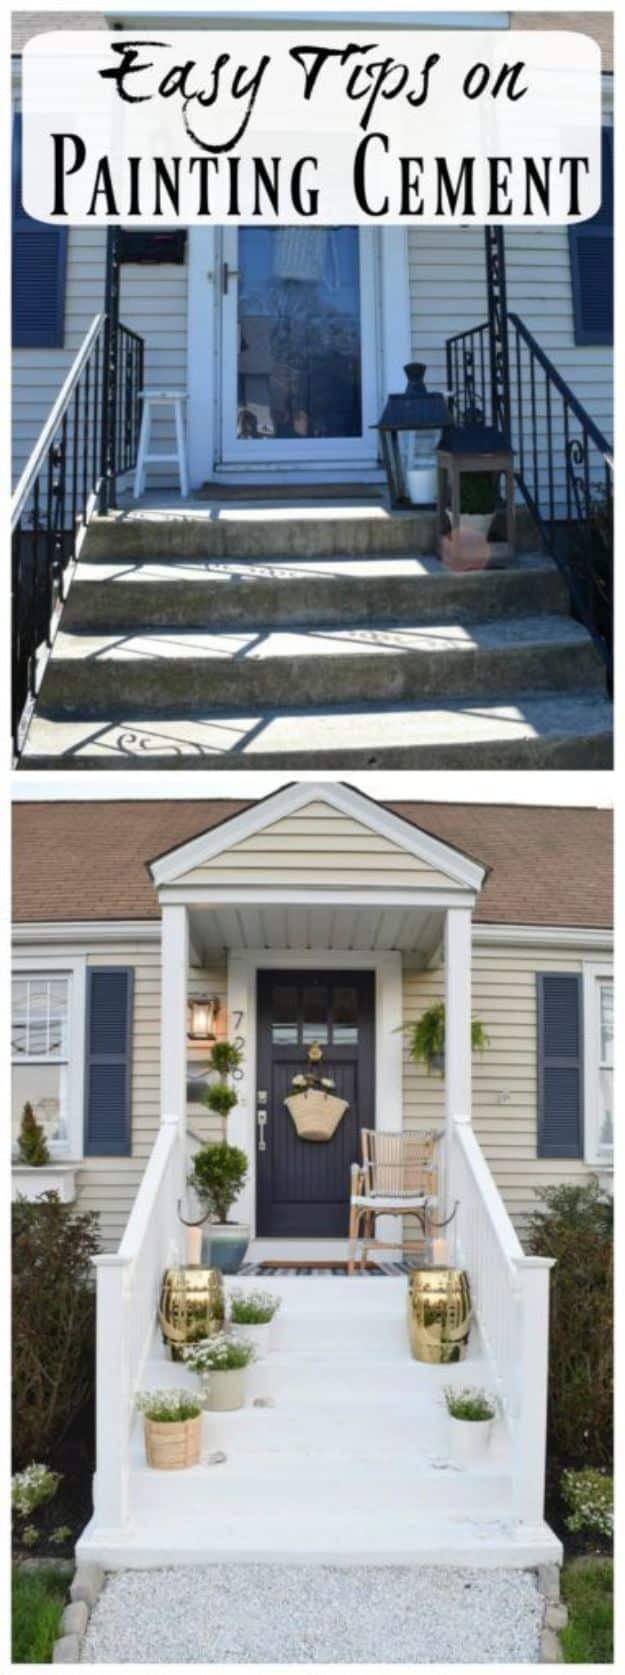 DIY Painting Hacks - Painted Cement Steps - Easy Ways To Shortcut House Painting - Wall Prep, Painters Tape, Trim, Edging, Ceiling, Exterior Cutting In, Furniture and Crafts Paint Tips - Paint Your House Or Your Room With These Time Saving Painter Hacks and Quick Tricks http://diyjoy.com/diy-painting-hacks